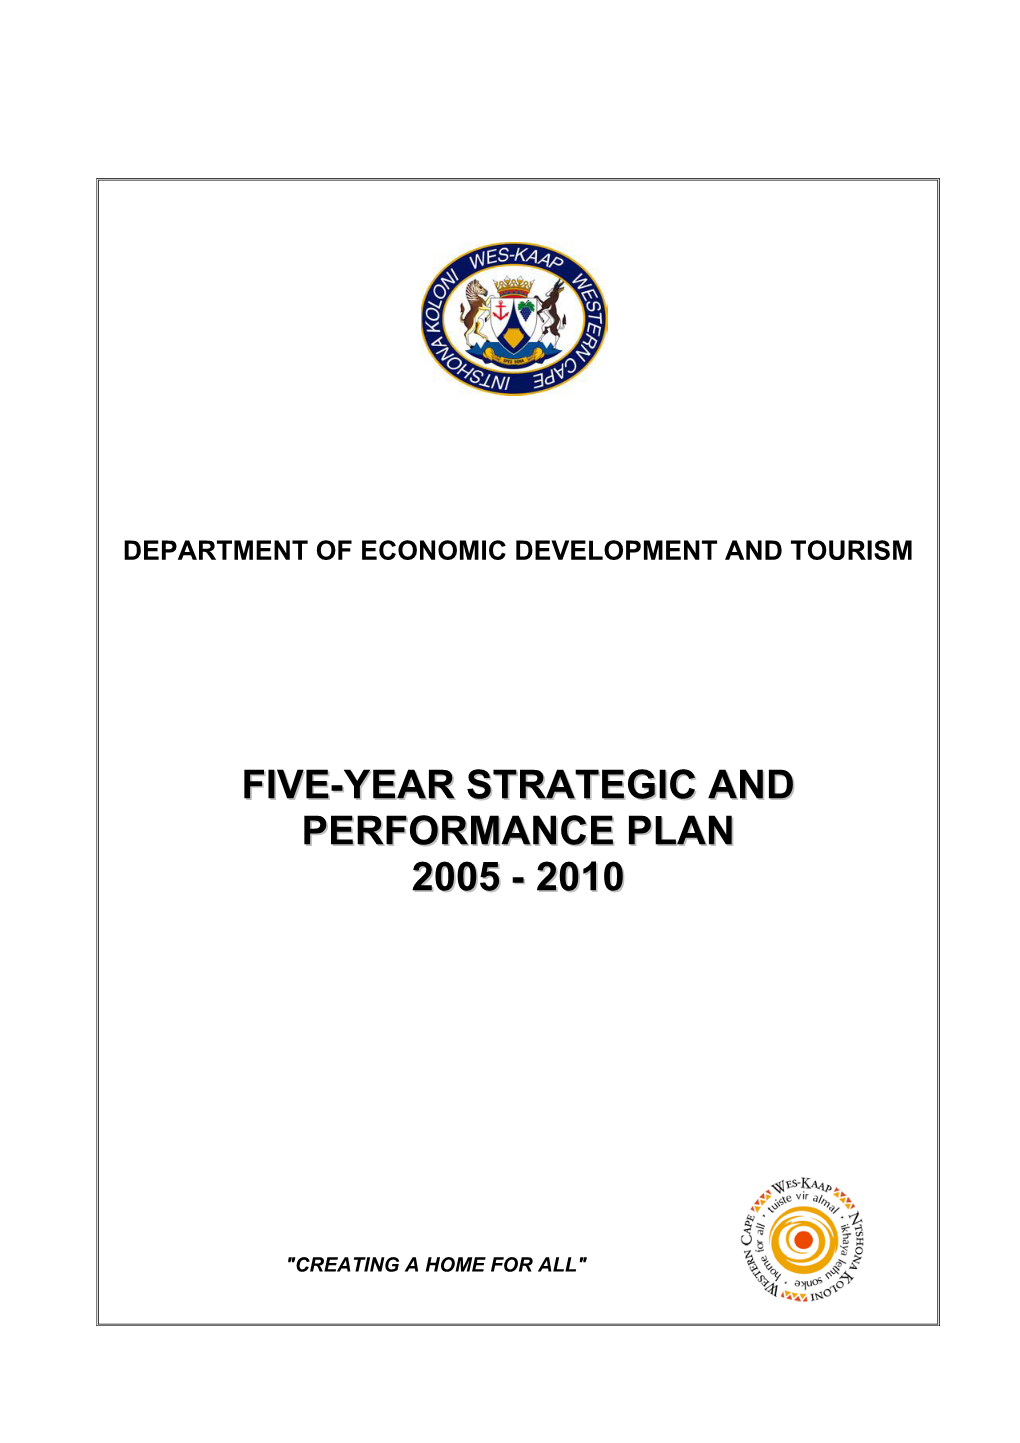 Five-Year Strategic and Performance Plan 2005 - 2010